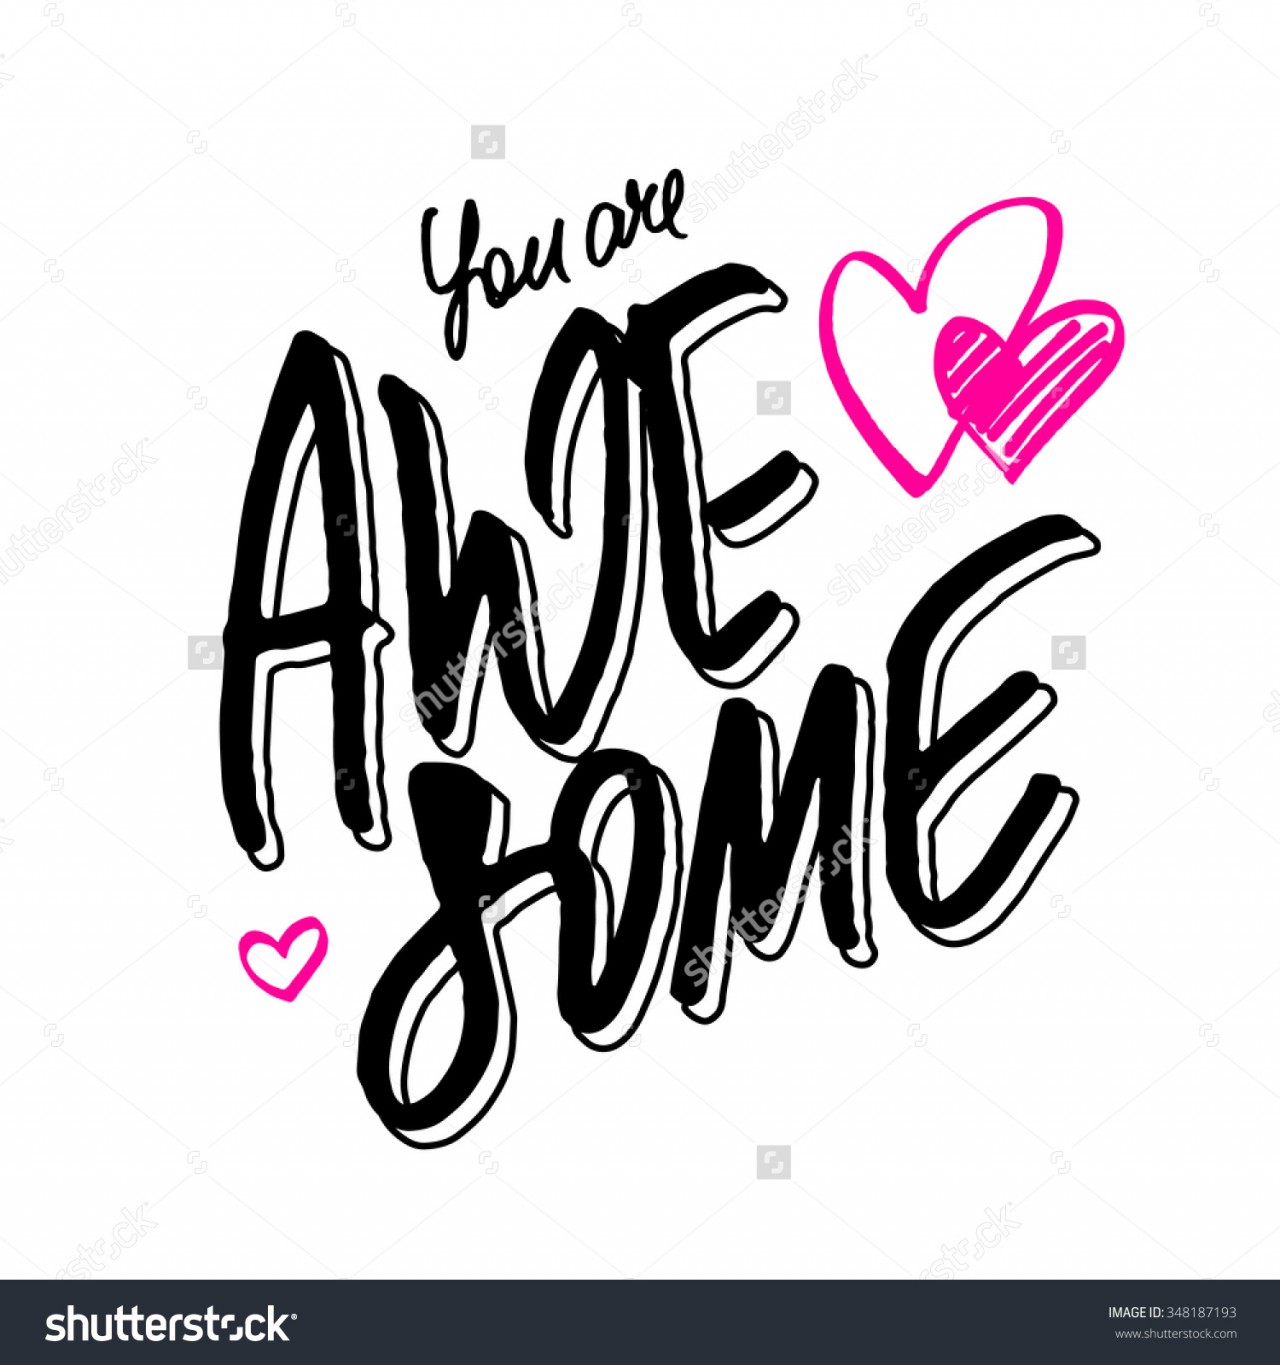 stock-vector-positive-quote-you-are-awesome-hand-lettering-with-pink-hand-drawn-hearts-isolated-on-white-348187193